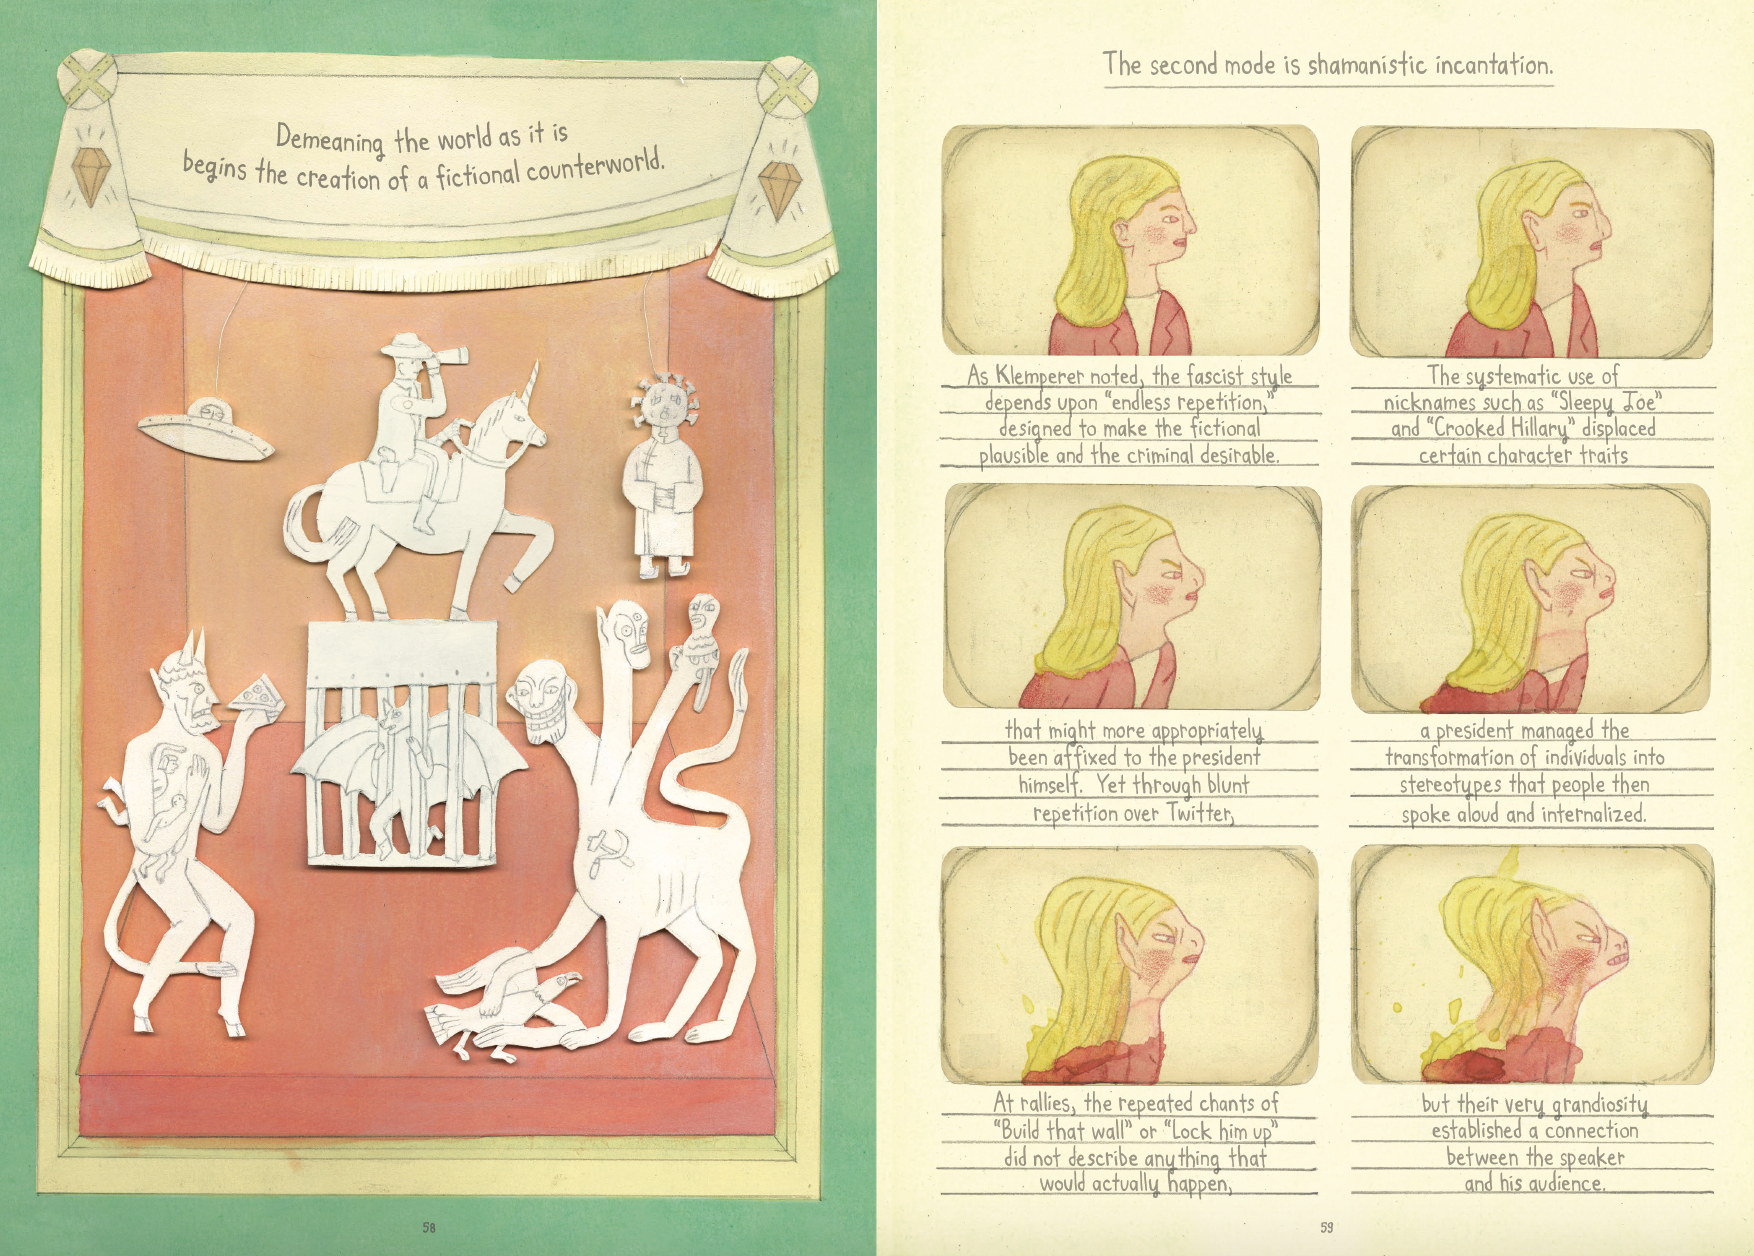 A page from the book shows pictures of people and animals.